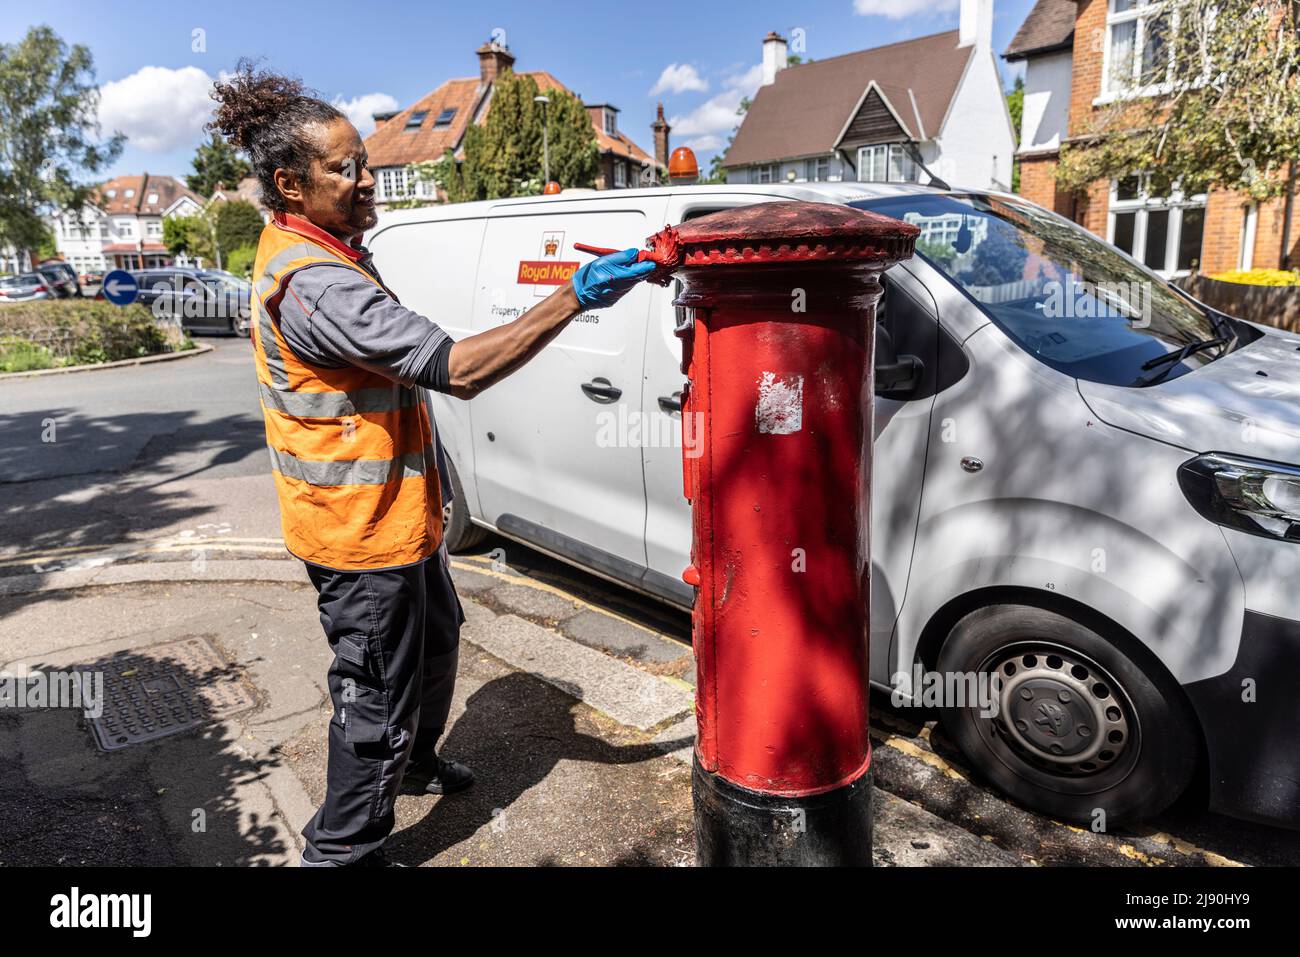 Royal Mail postal worker giving a post box a coat of red paint, London, England, UK Stock Photo